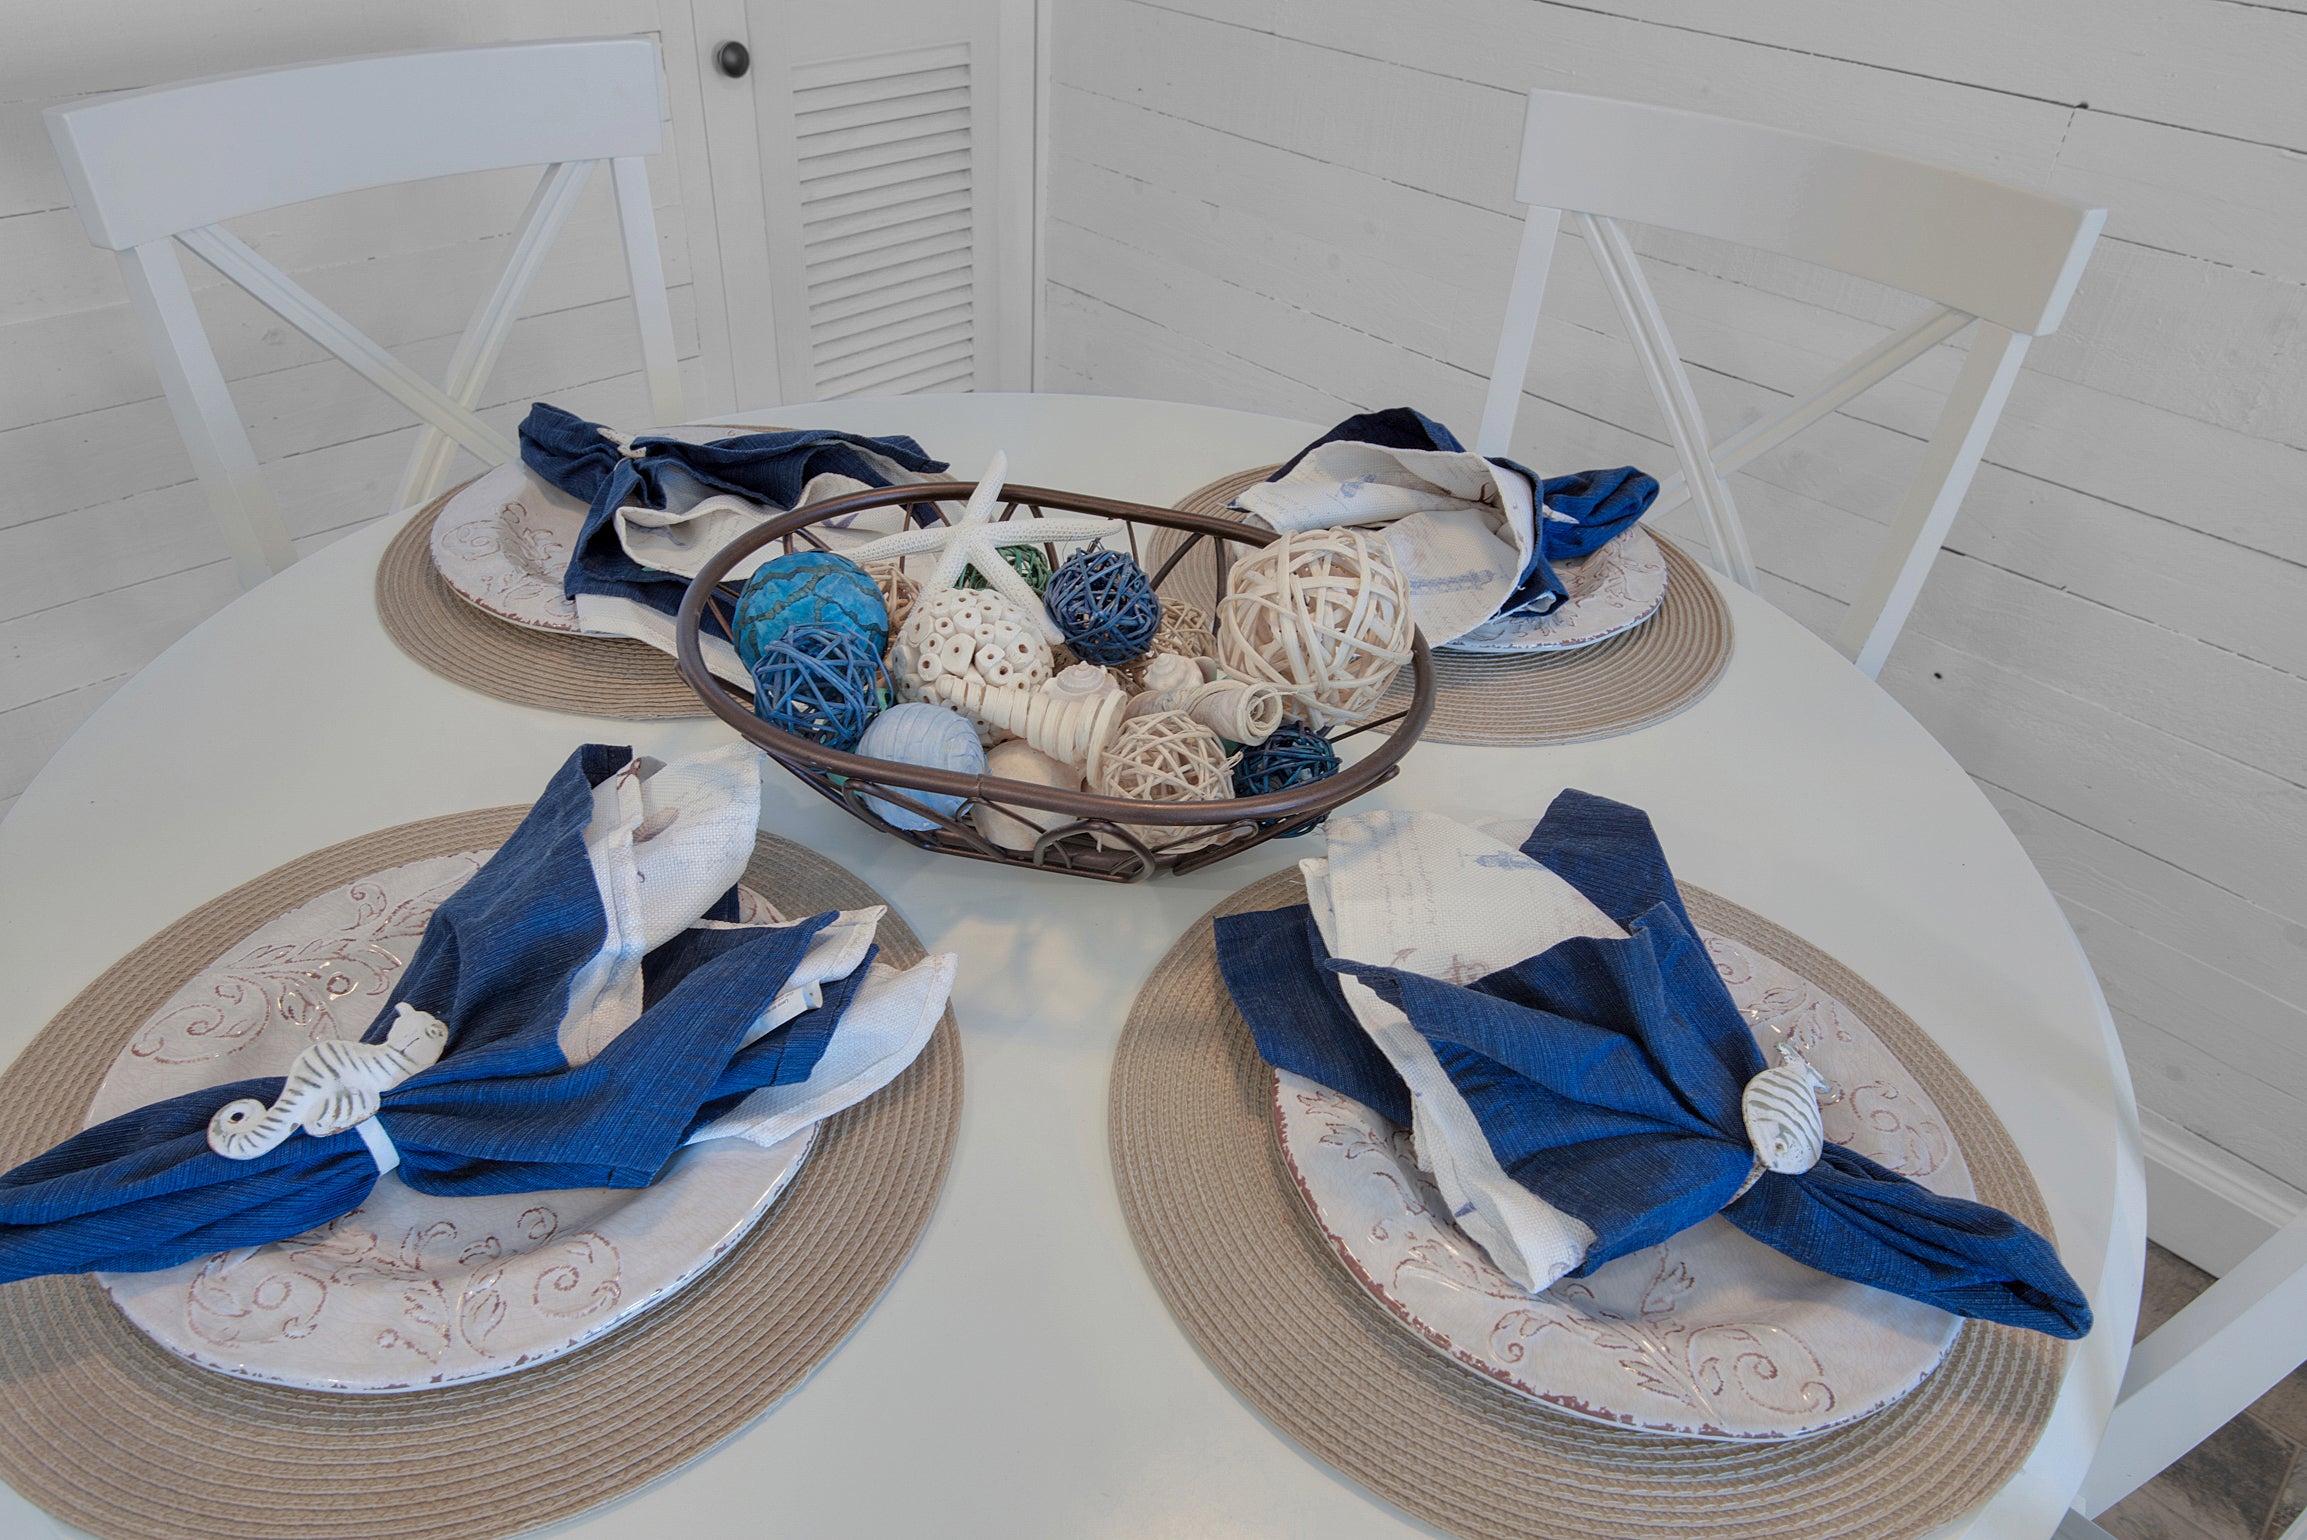 Dining Set seats 4 - Lovely Place Settings